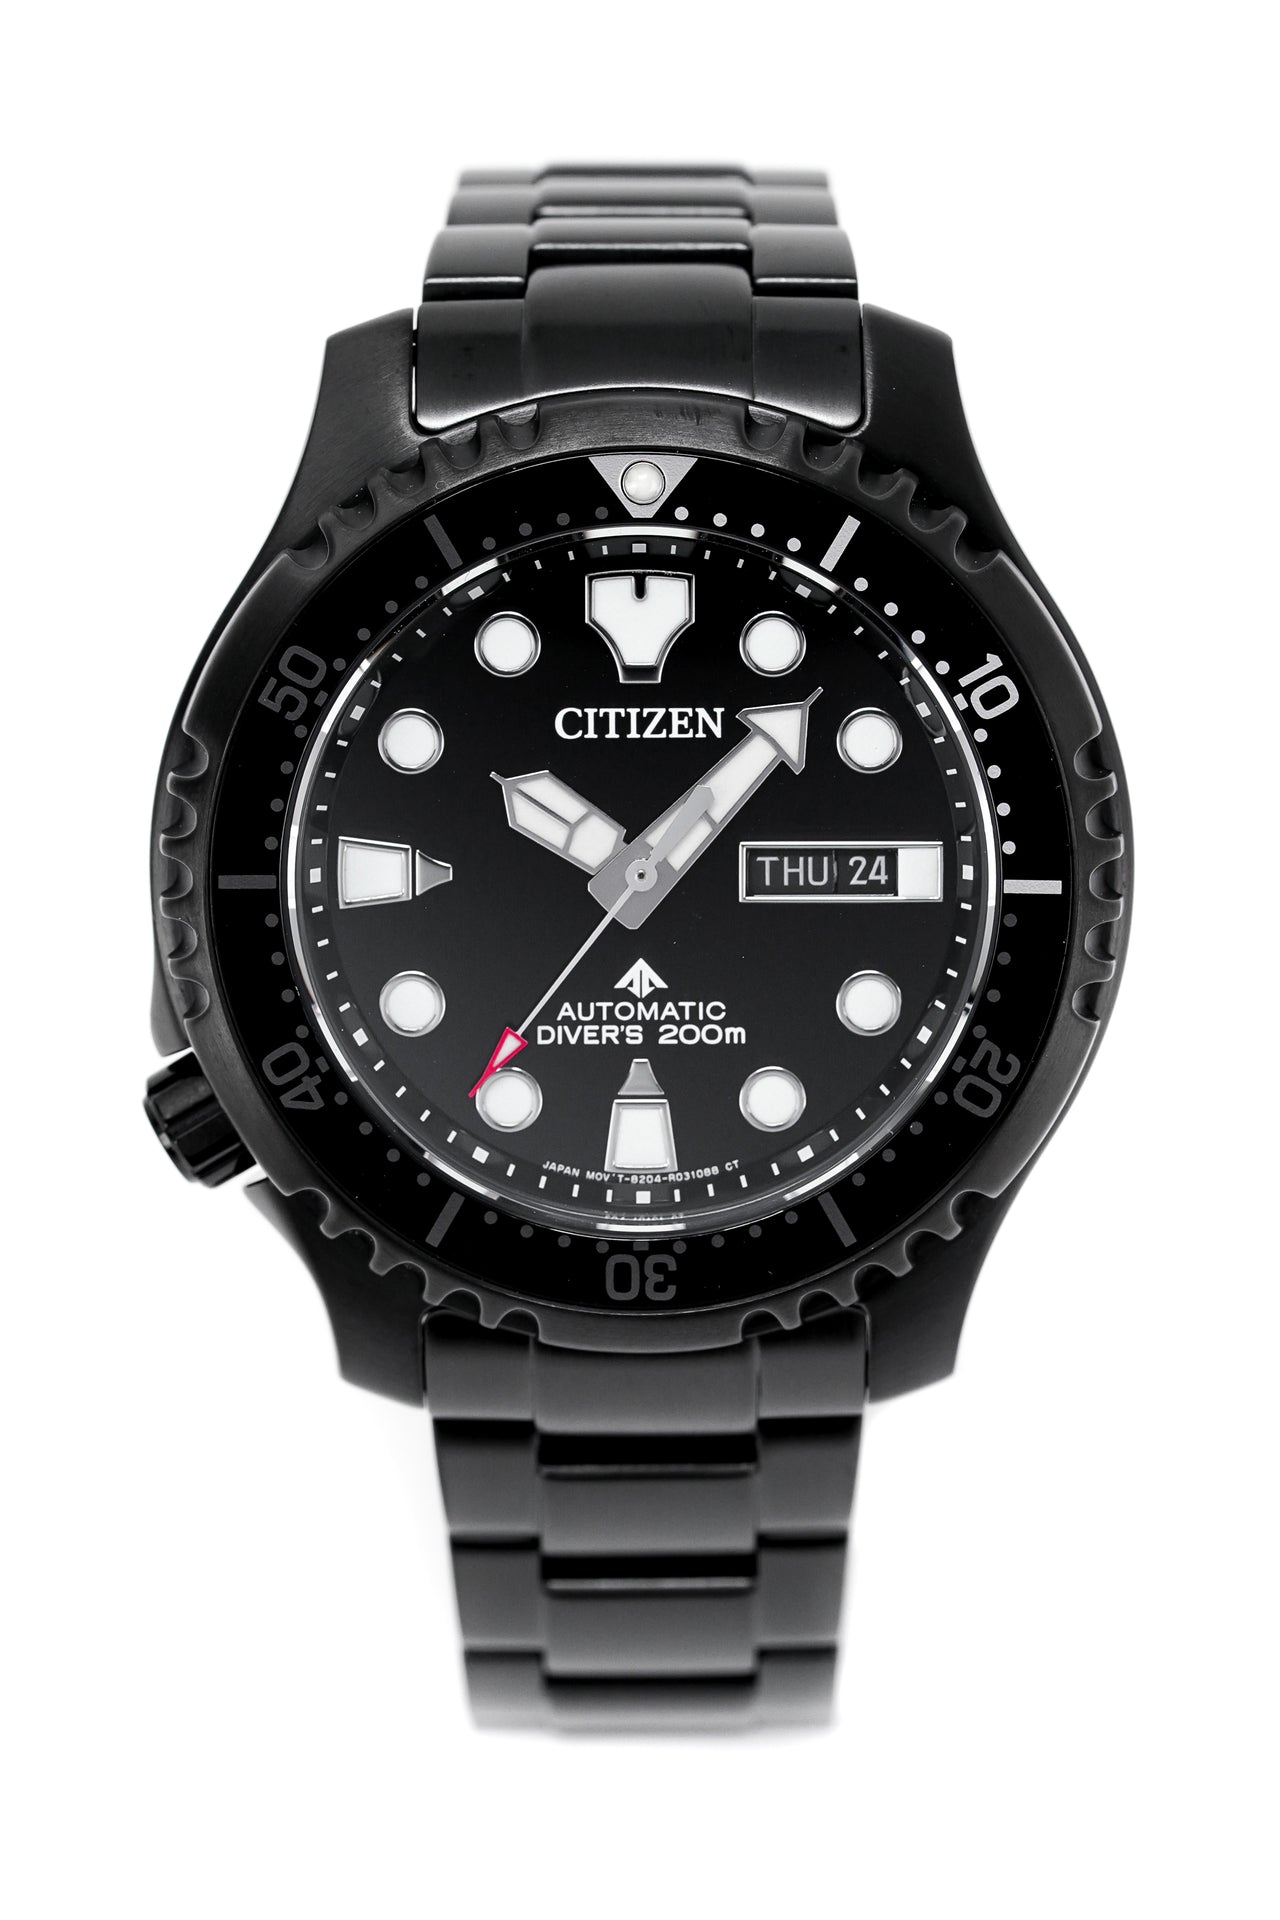 Citizen Eco-Drive Promaster Automatic Men's Watch Black NY0145-86EE